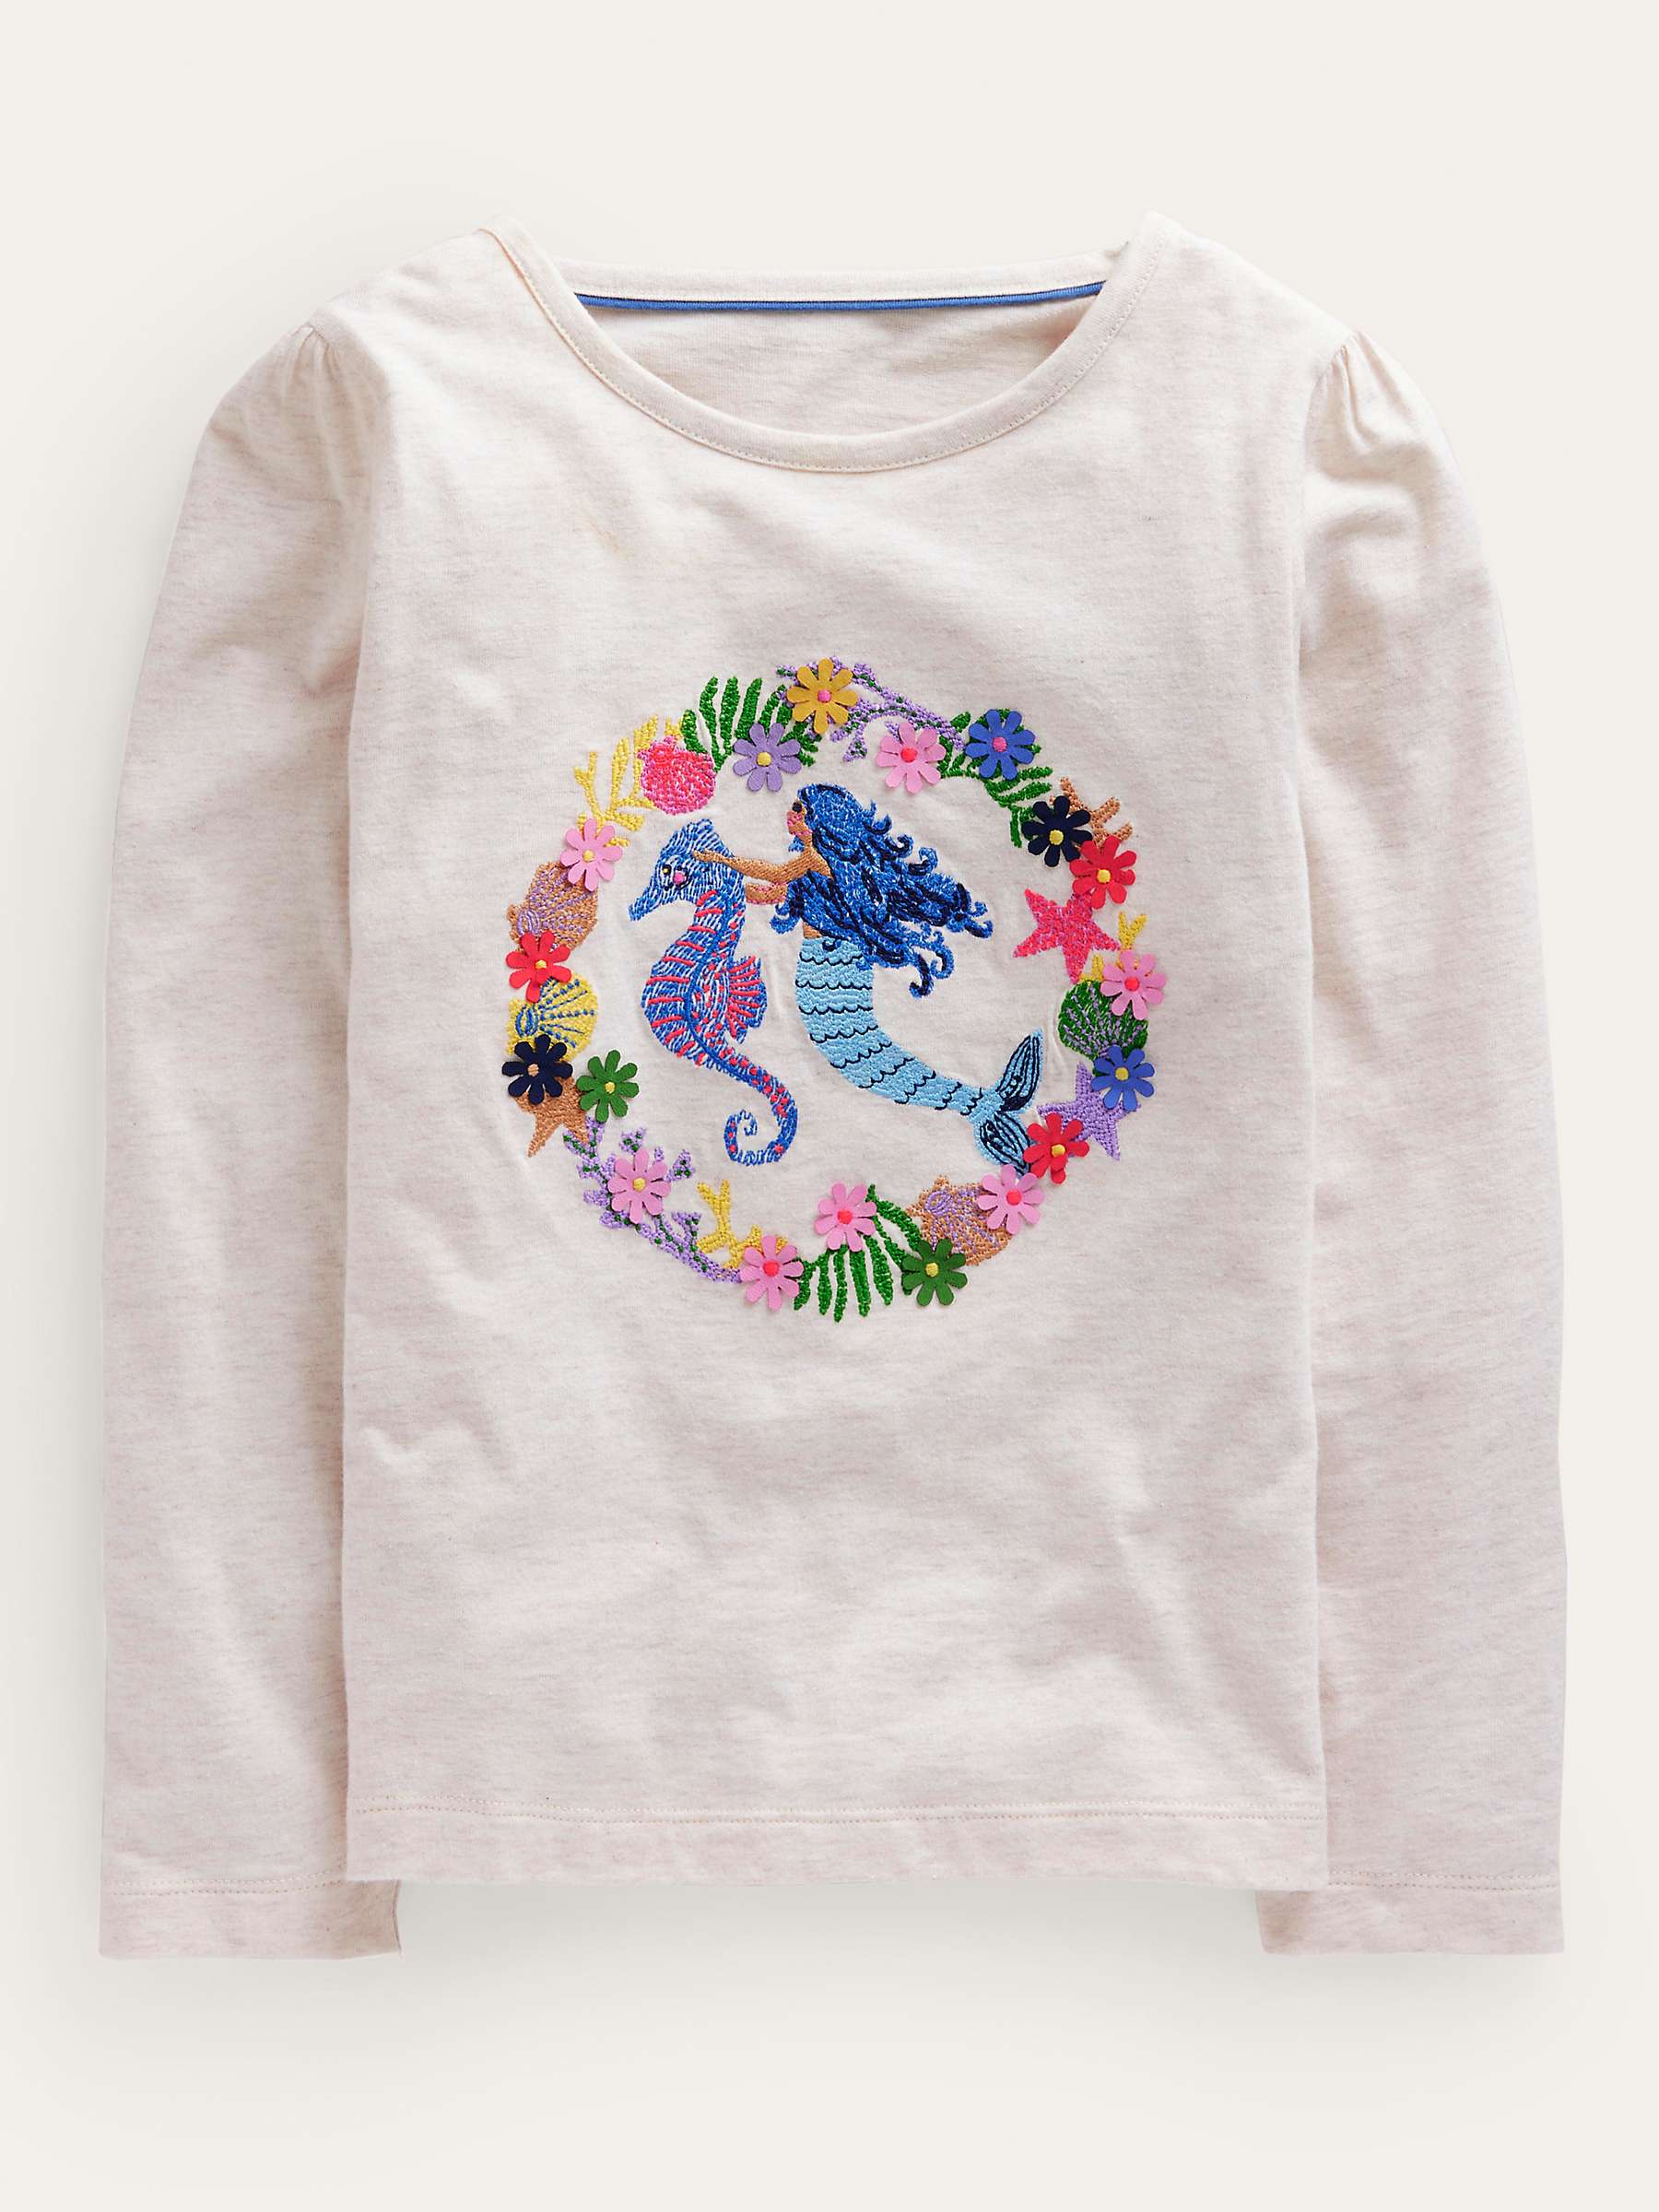 Buy Mini Boden Kids' Mermaid Superstitch Puff Long Sleeve Top, Oatmeal Marl Online at johnlewis.com